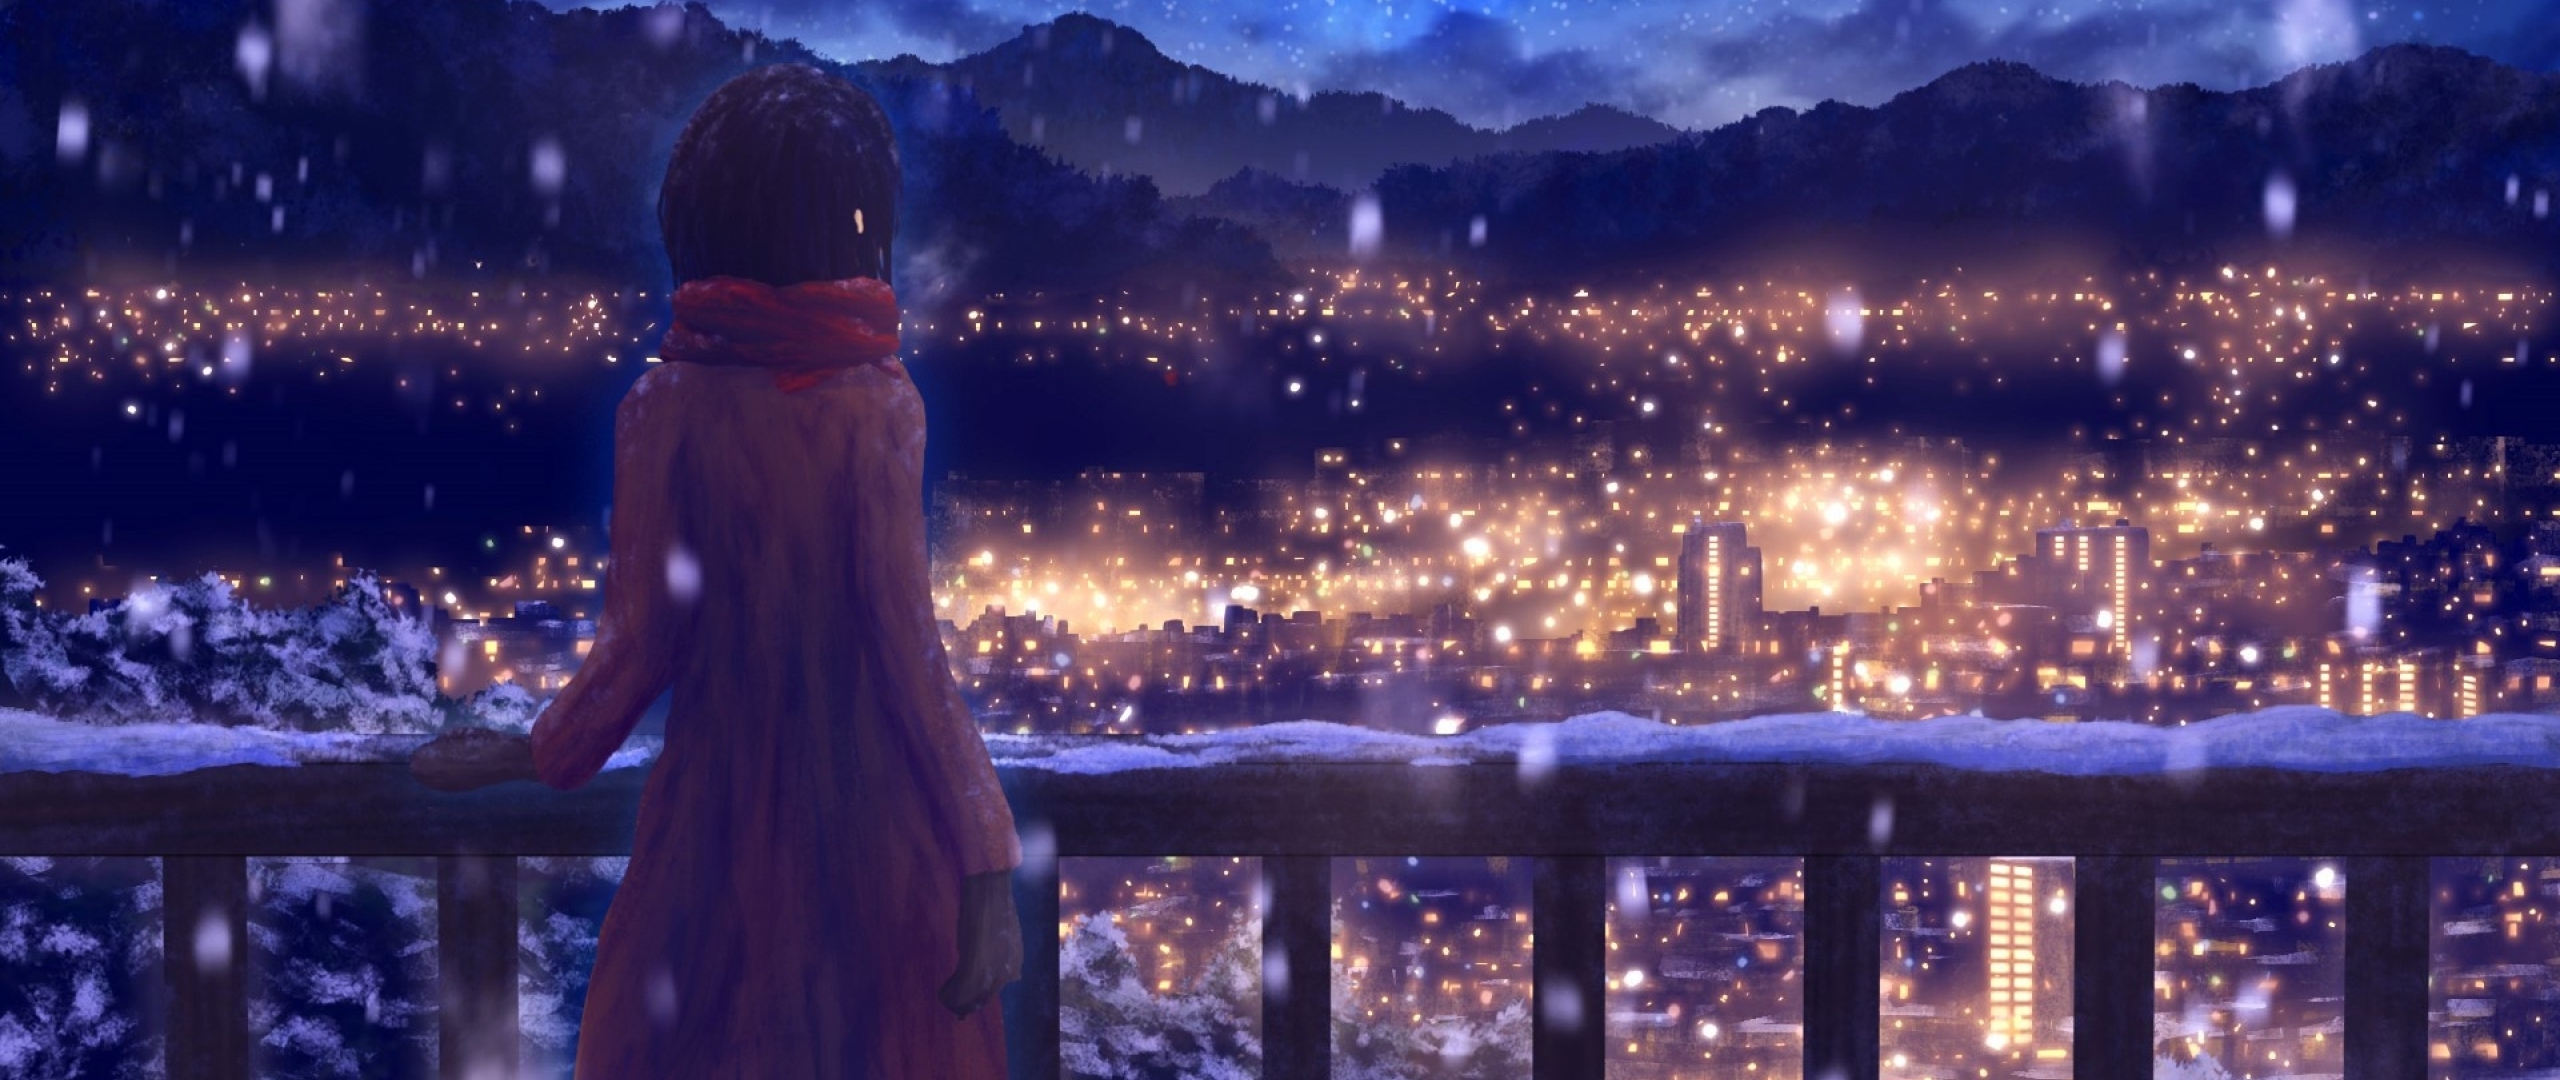 2560x1080 Anime Girl Standing Alone In Snow 2560x1080 Resolution Wallpaper Hd Nature 4k Wallpapers Images Photos And Background Wallpapers Den